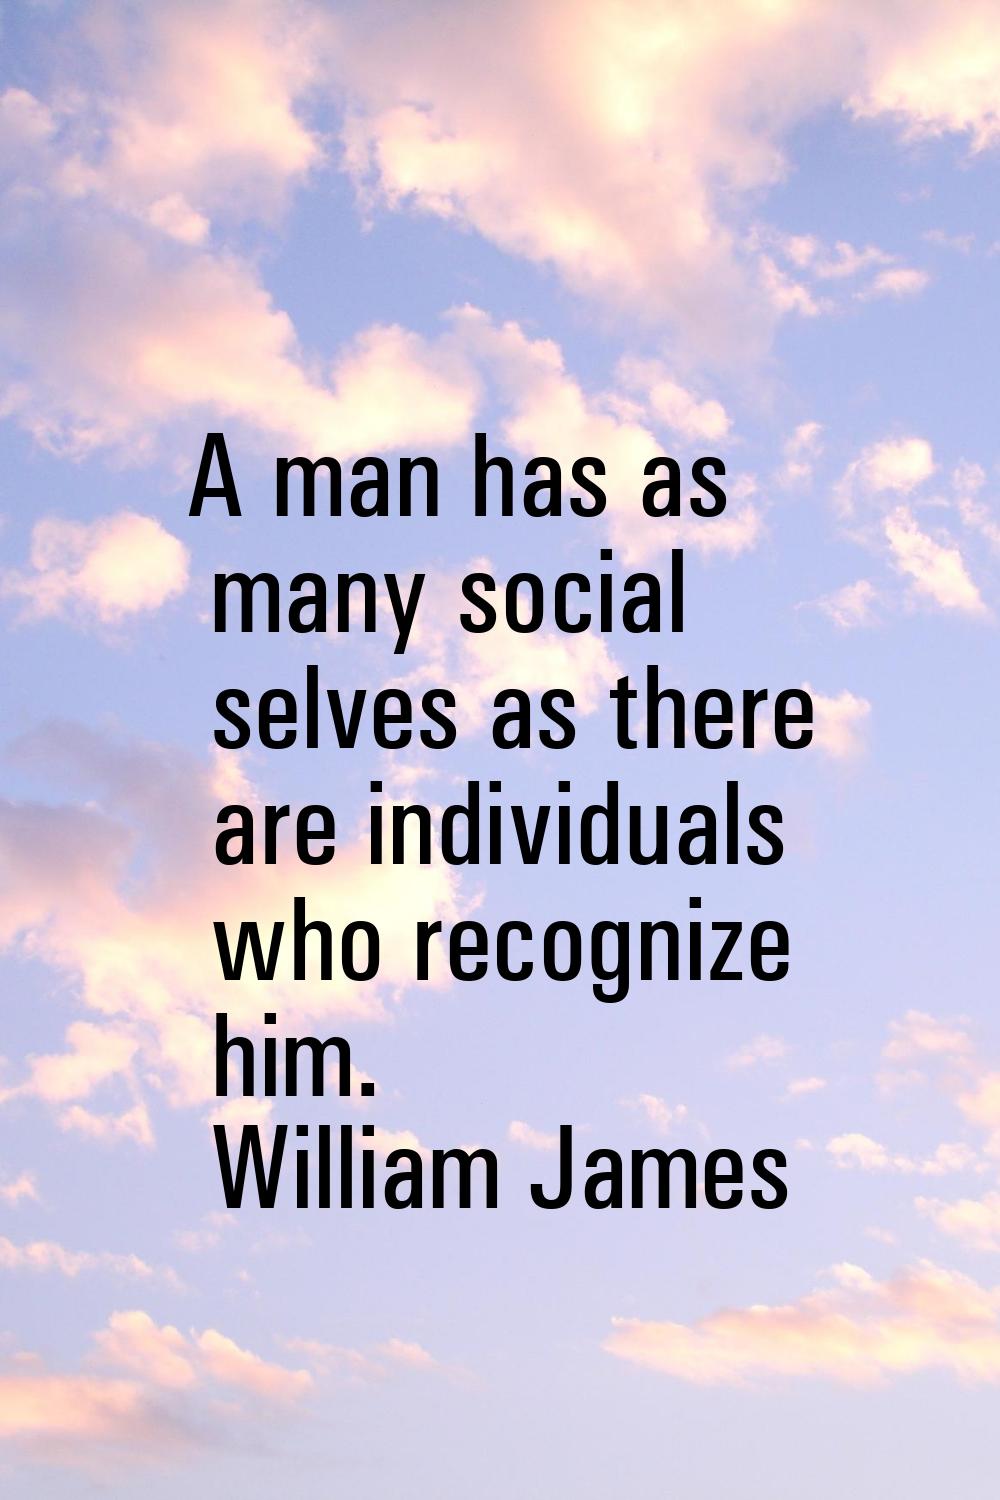 A man has as many social selves as there are individuals who recognize him.